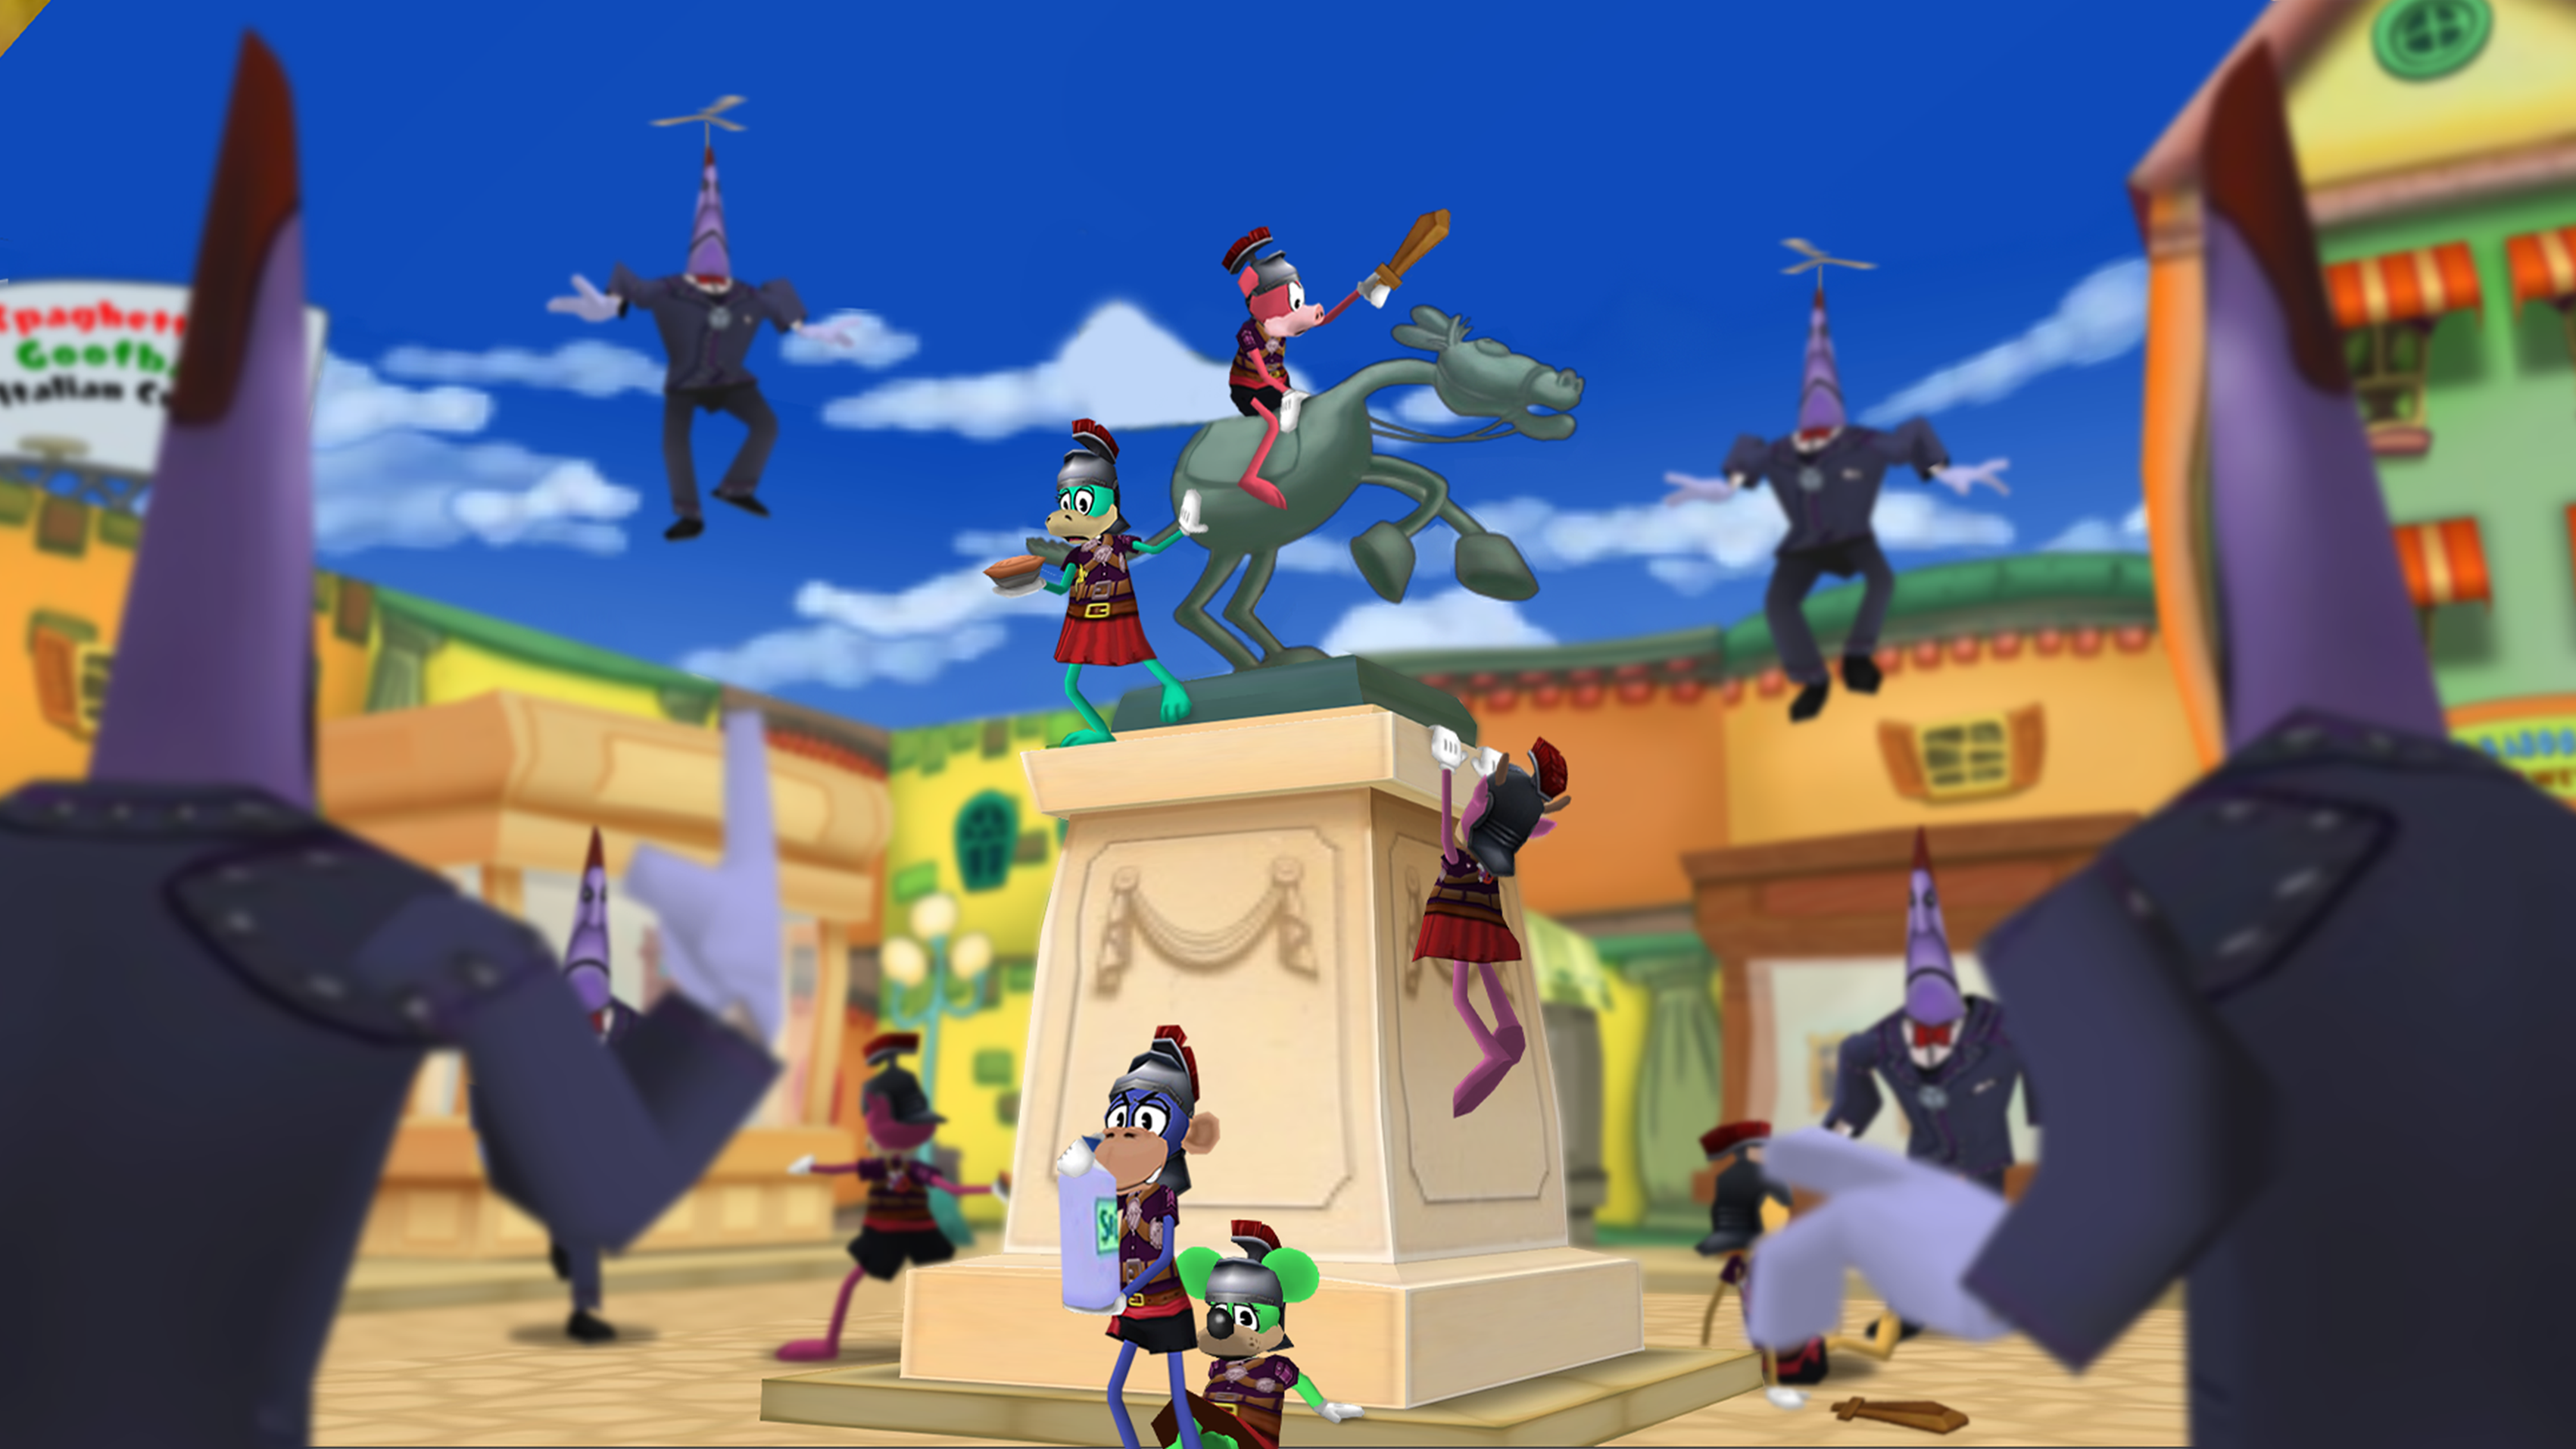 Back Stabbers invading a street in Toontown Central, with several Toons defending.